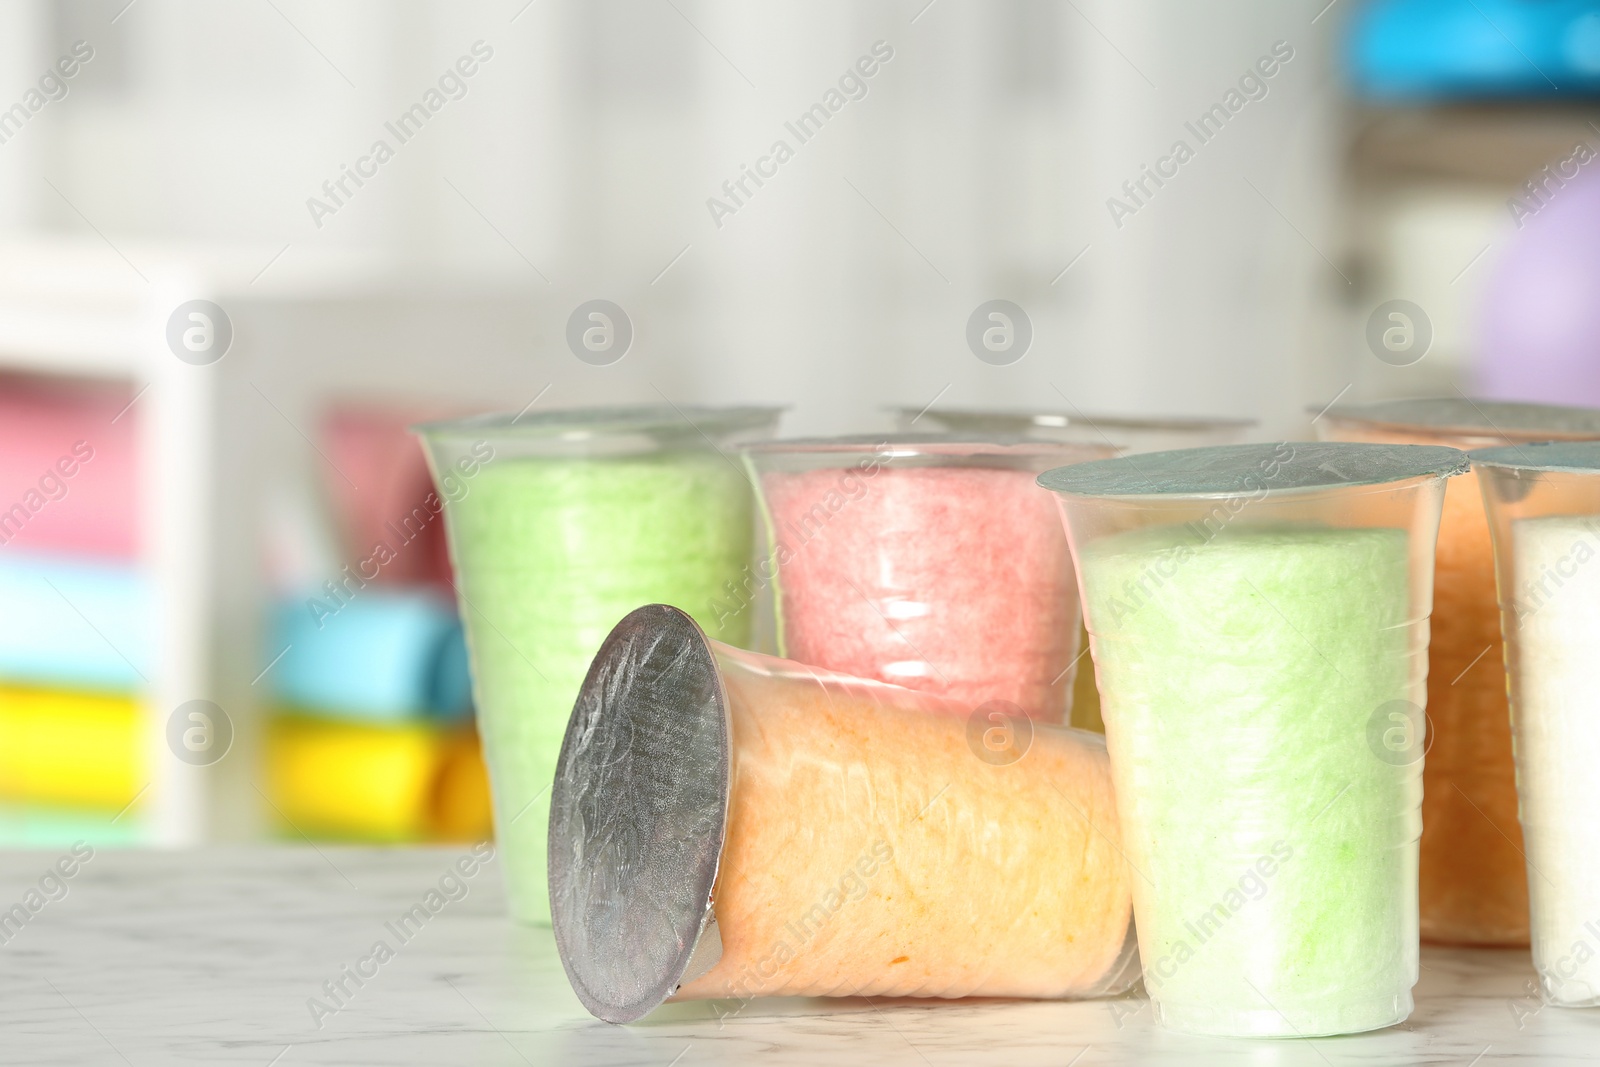 Photo of Plastic cups with cotton candy on table against blurred background